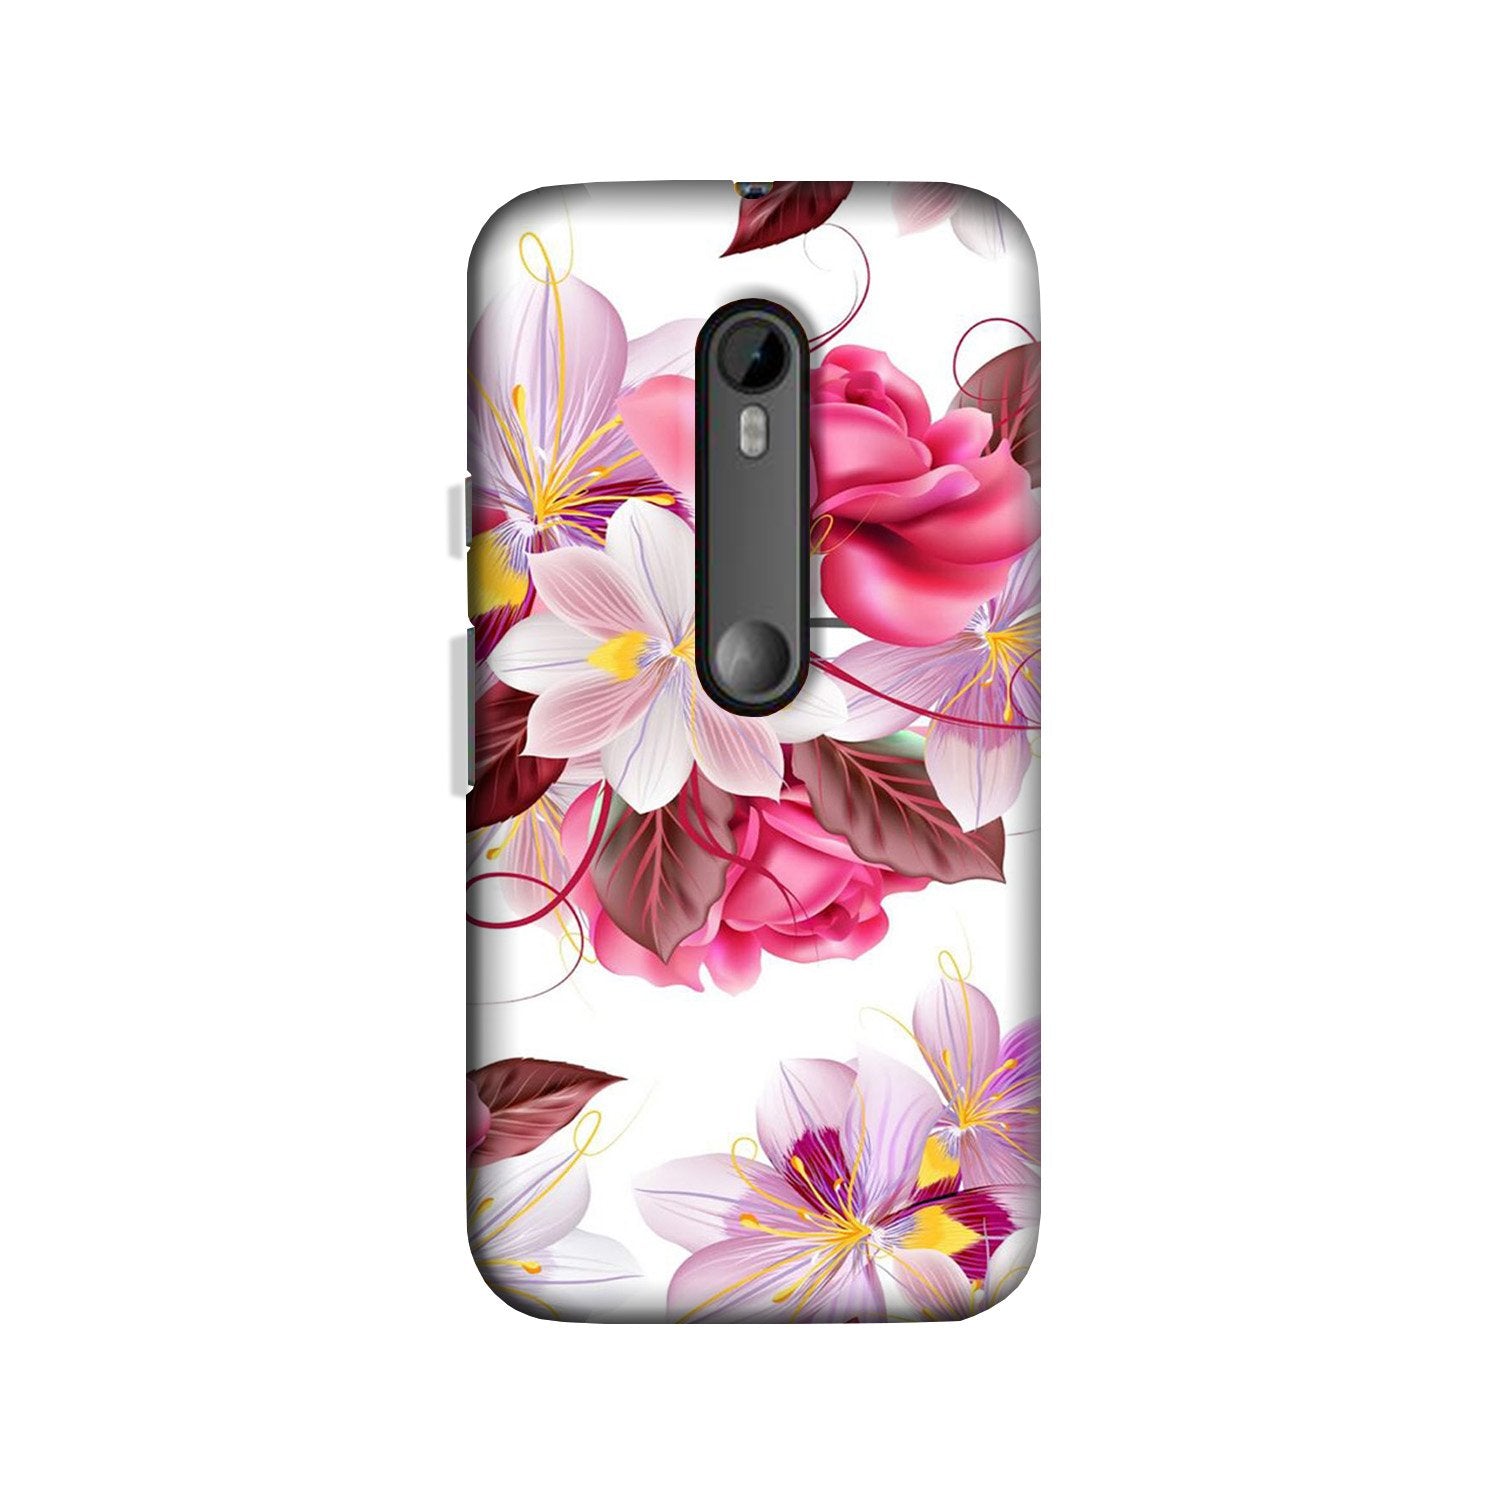 Beautiful flowers Case for Moto X Play